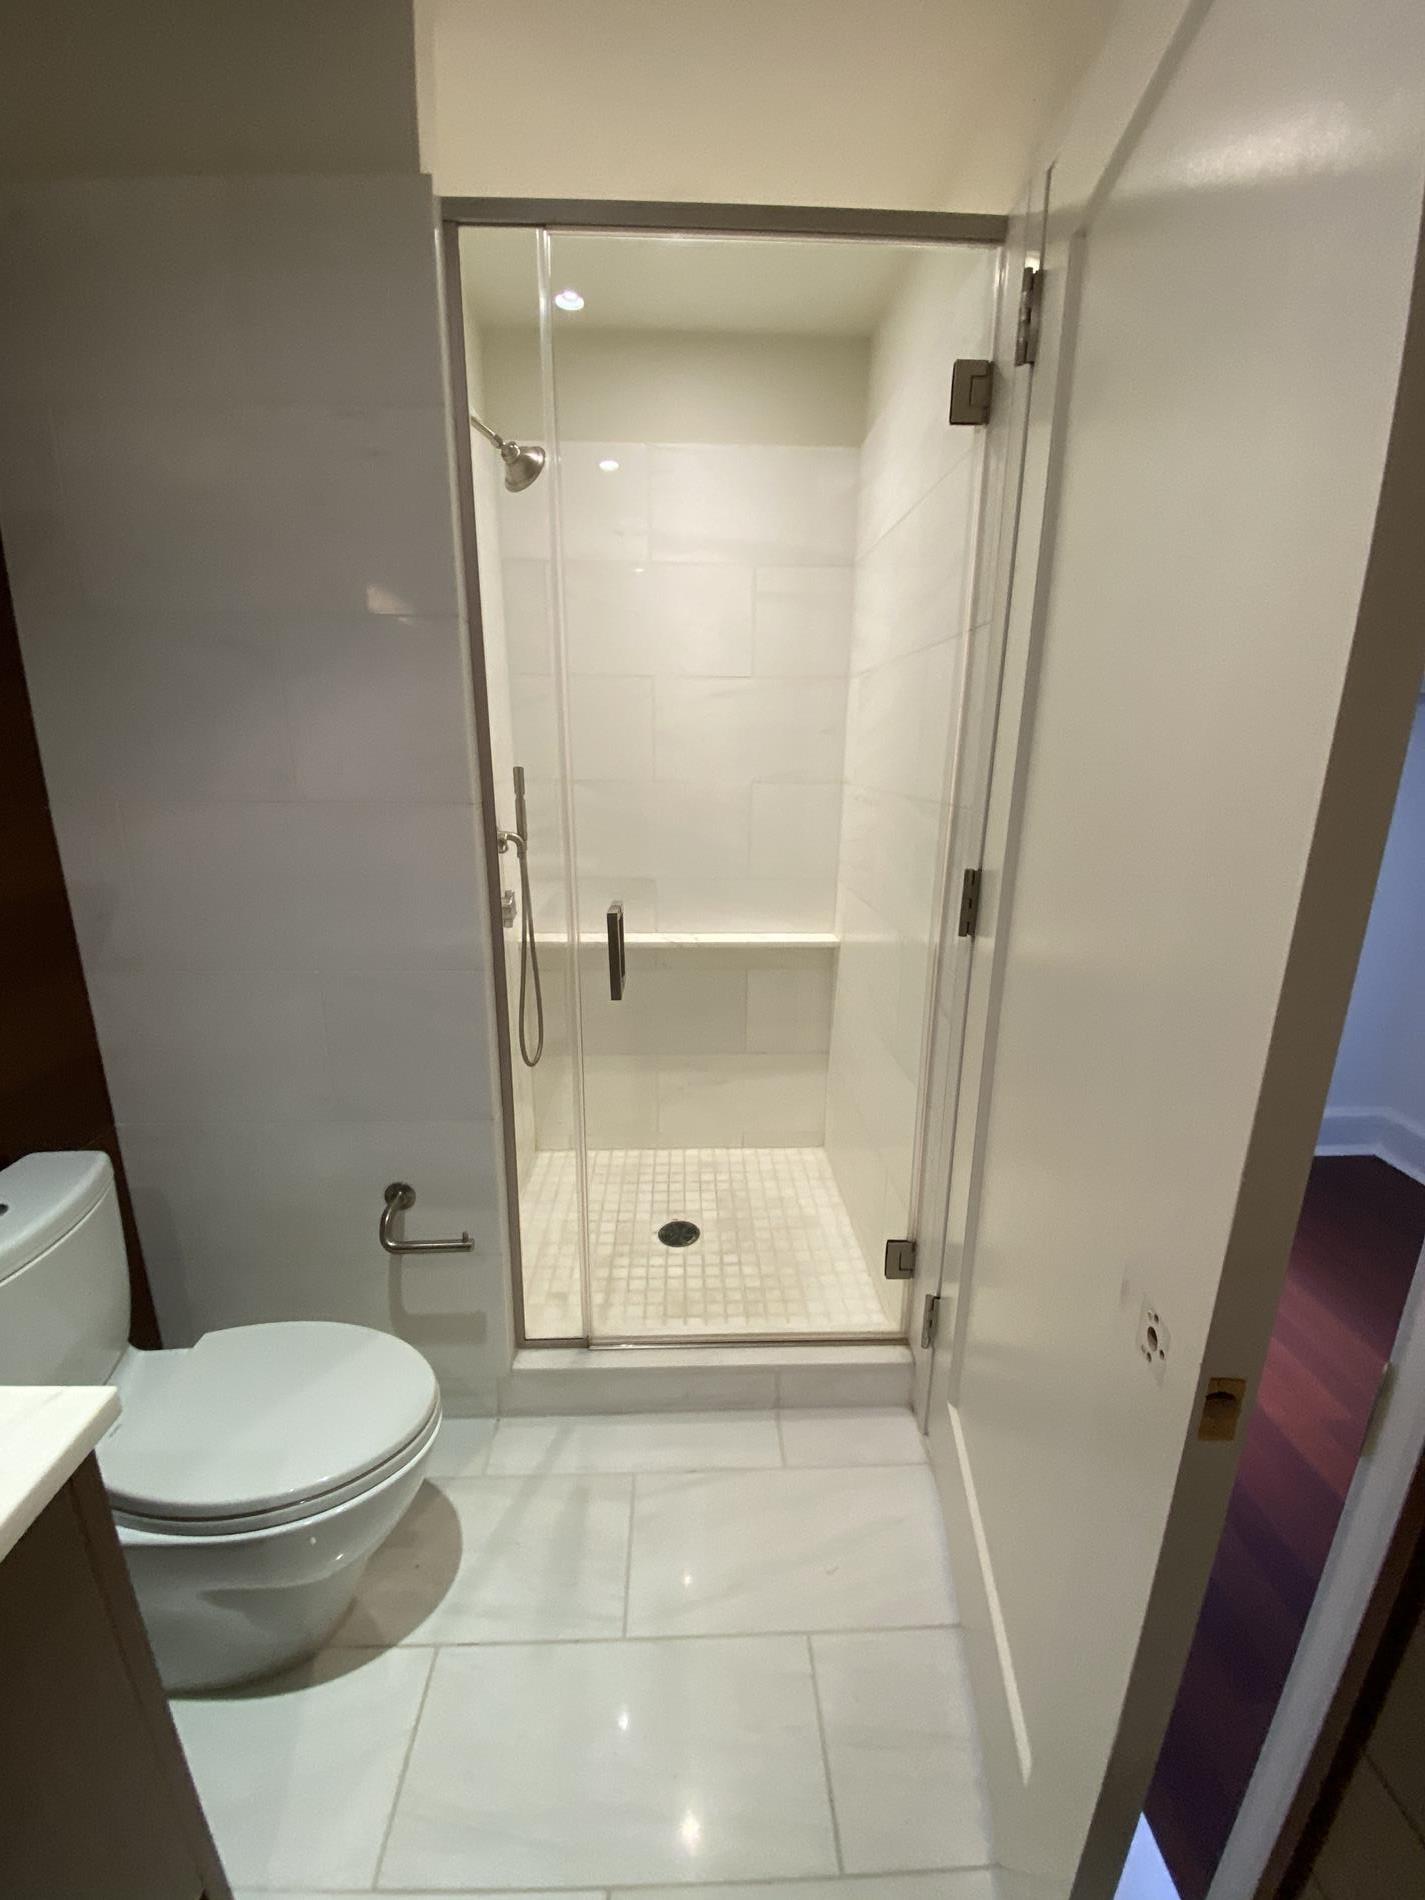 a bathroom with a glass door shower and toilet